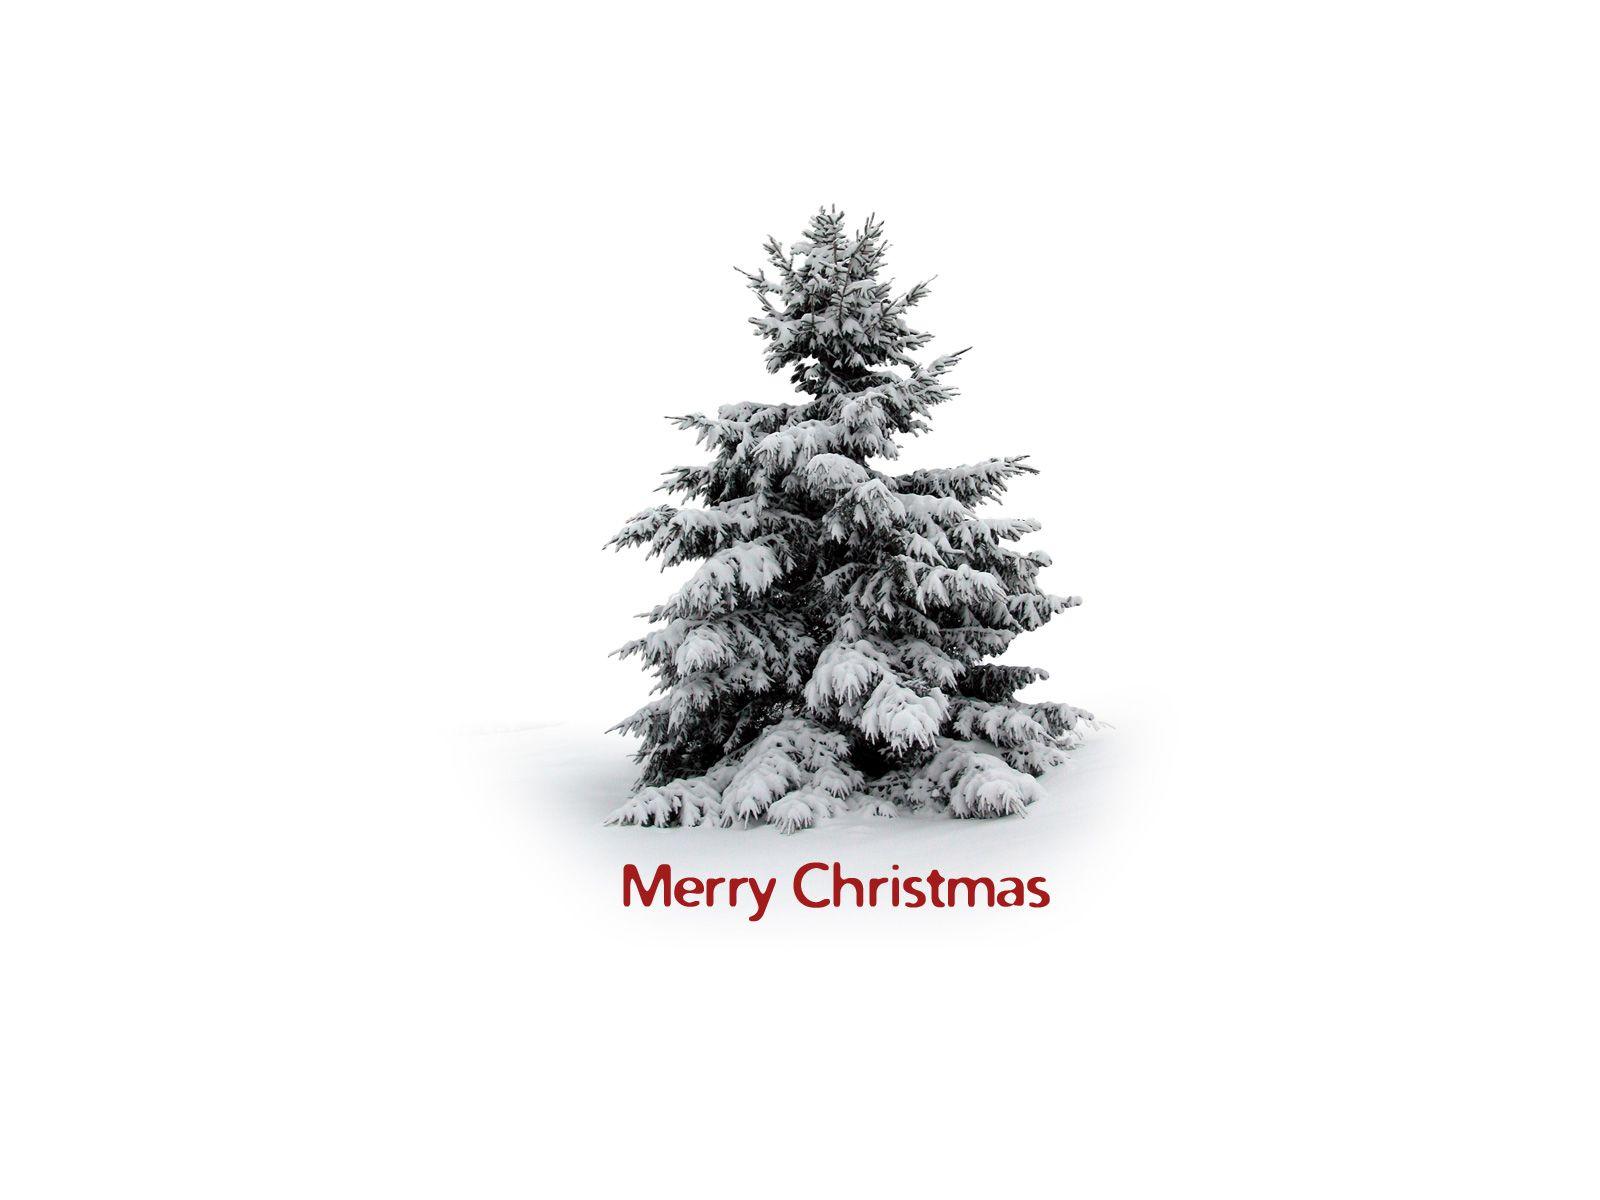 Download the White Christmas Wallpaper, White Christmas iPhone